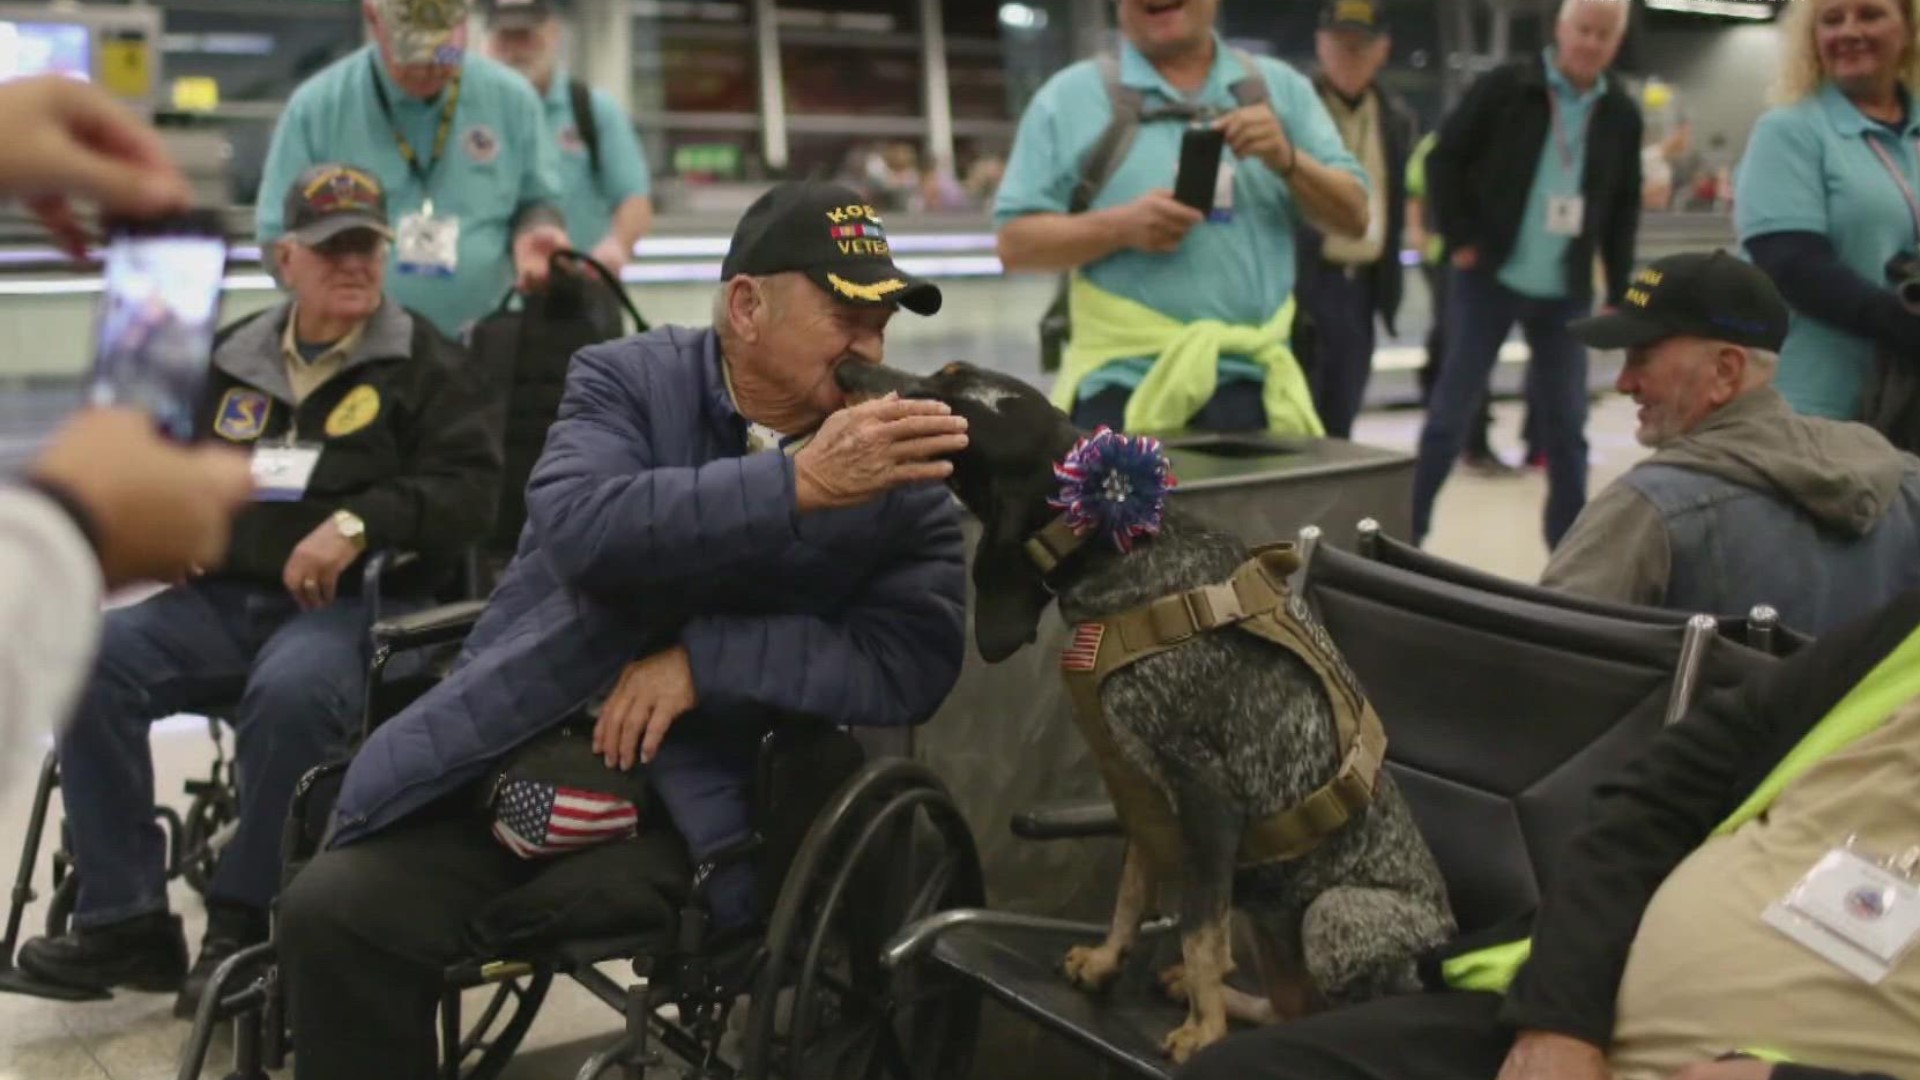 Indy Honor Flight takes veterans to Washington, D.C. to see the memorials built in their honor. Because of the pandemic, they haven't gotten to go since 2019.